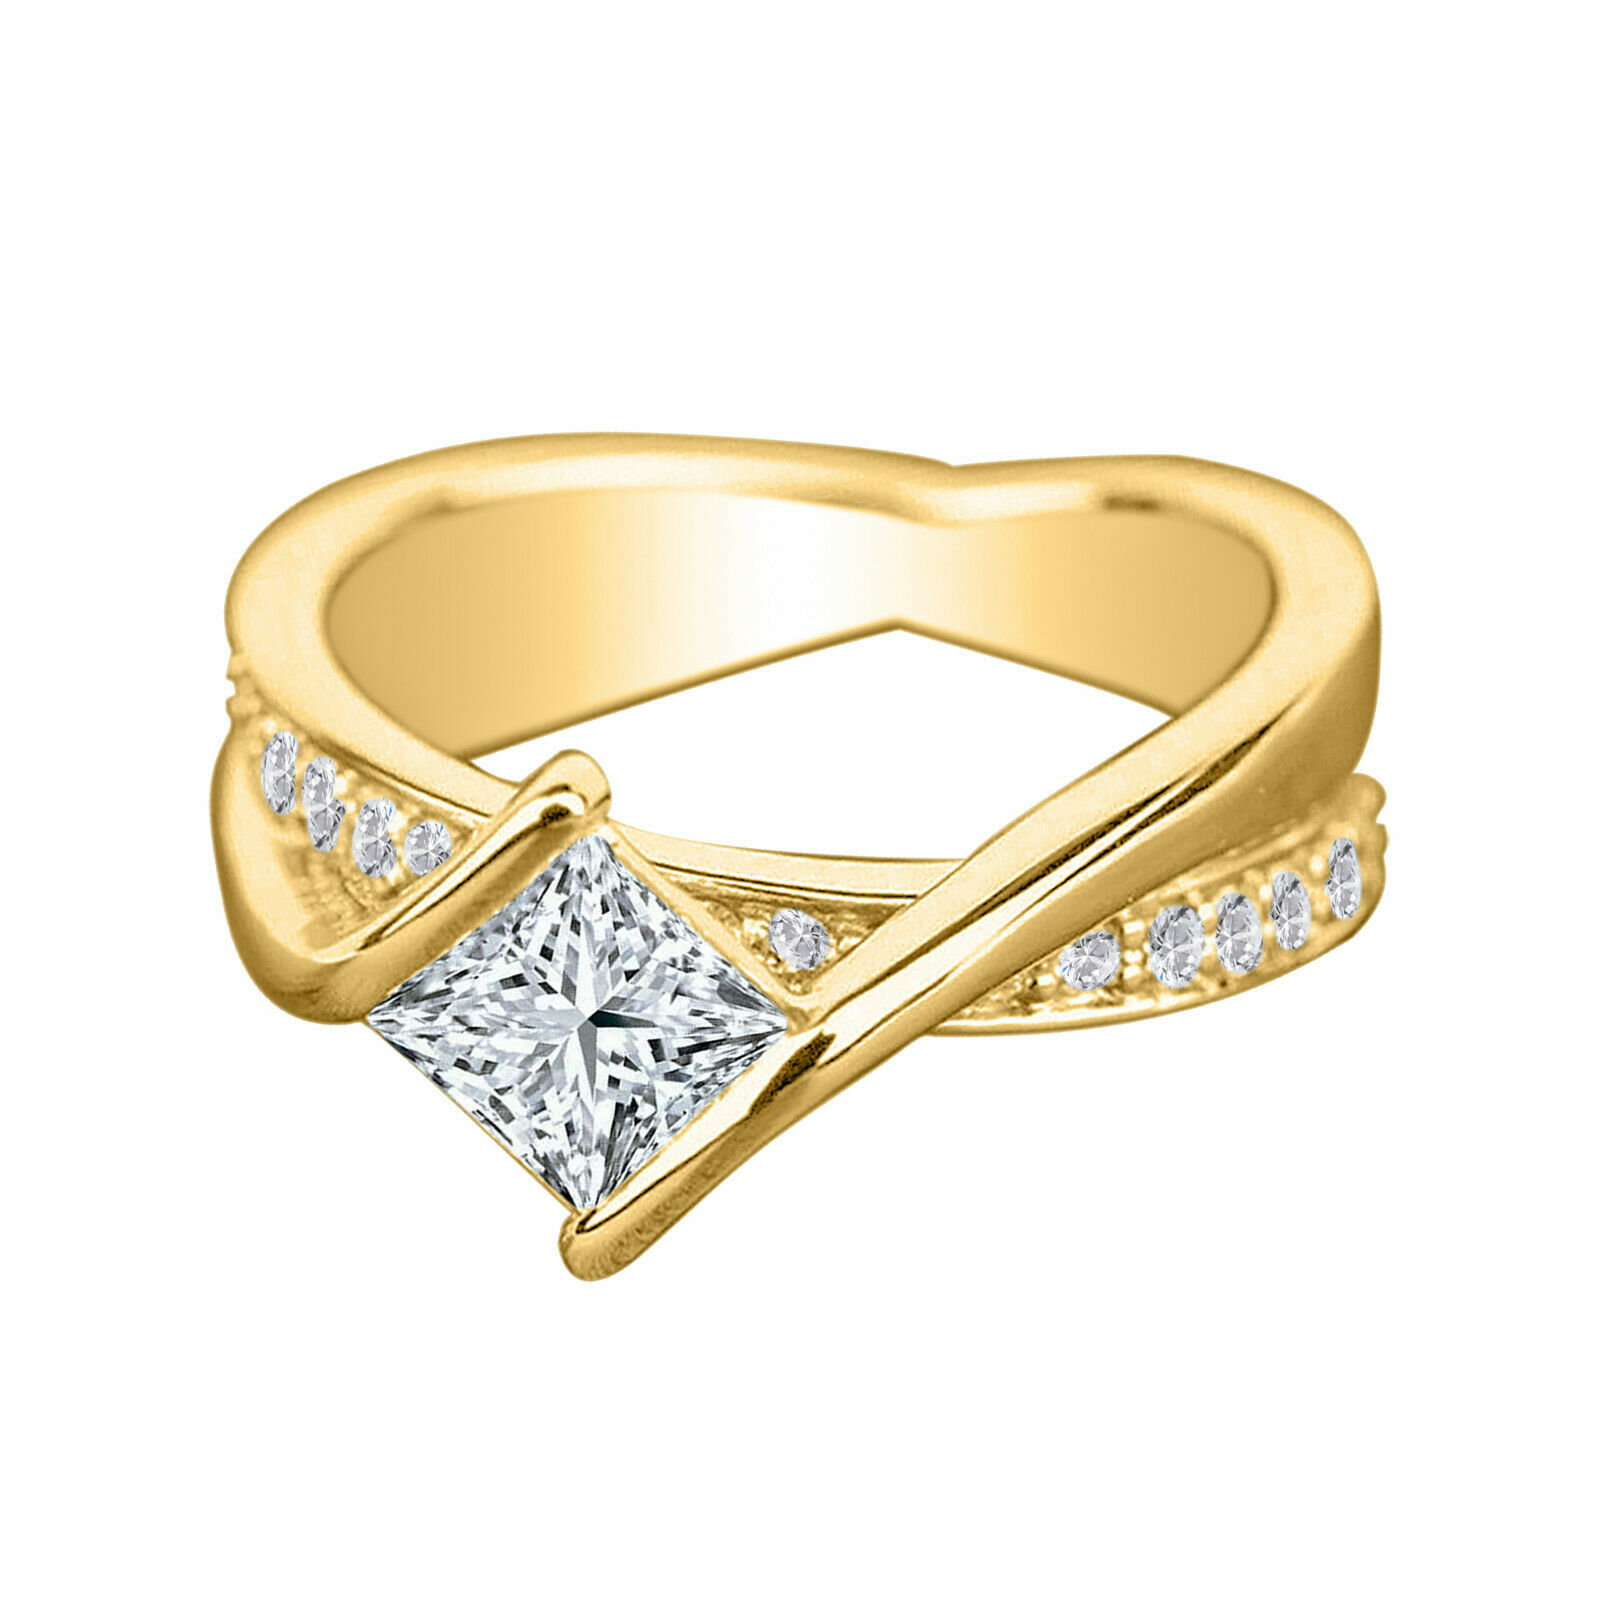 3.30ct Princess Cut Diamond Engagement Ring 14k Yellow Gold Over Jewelry Gift